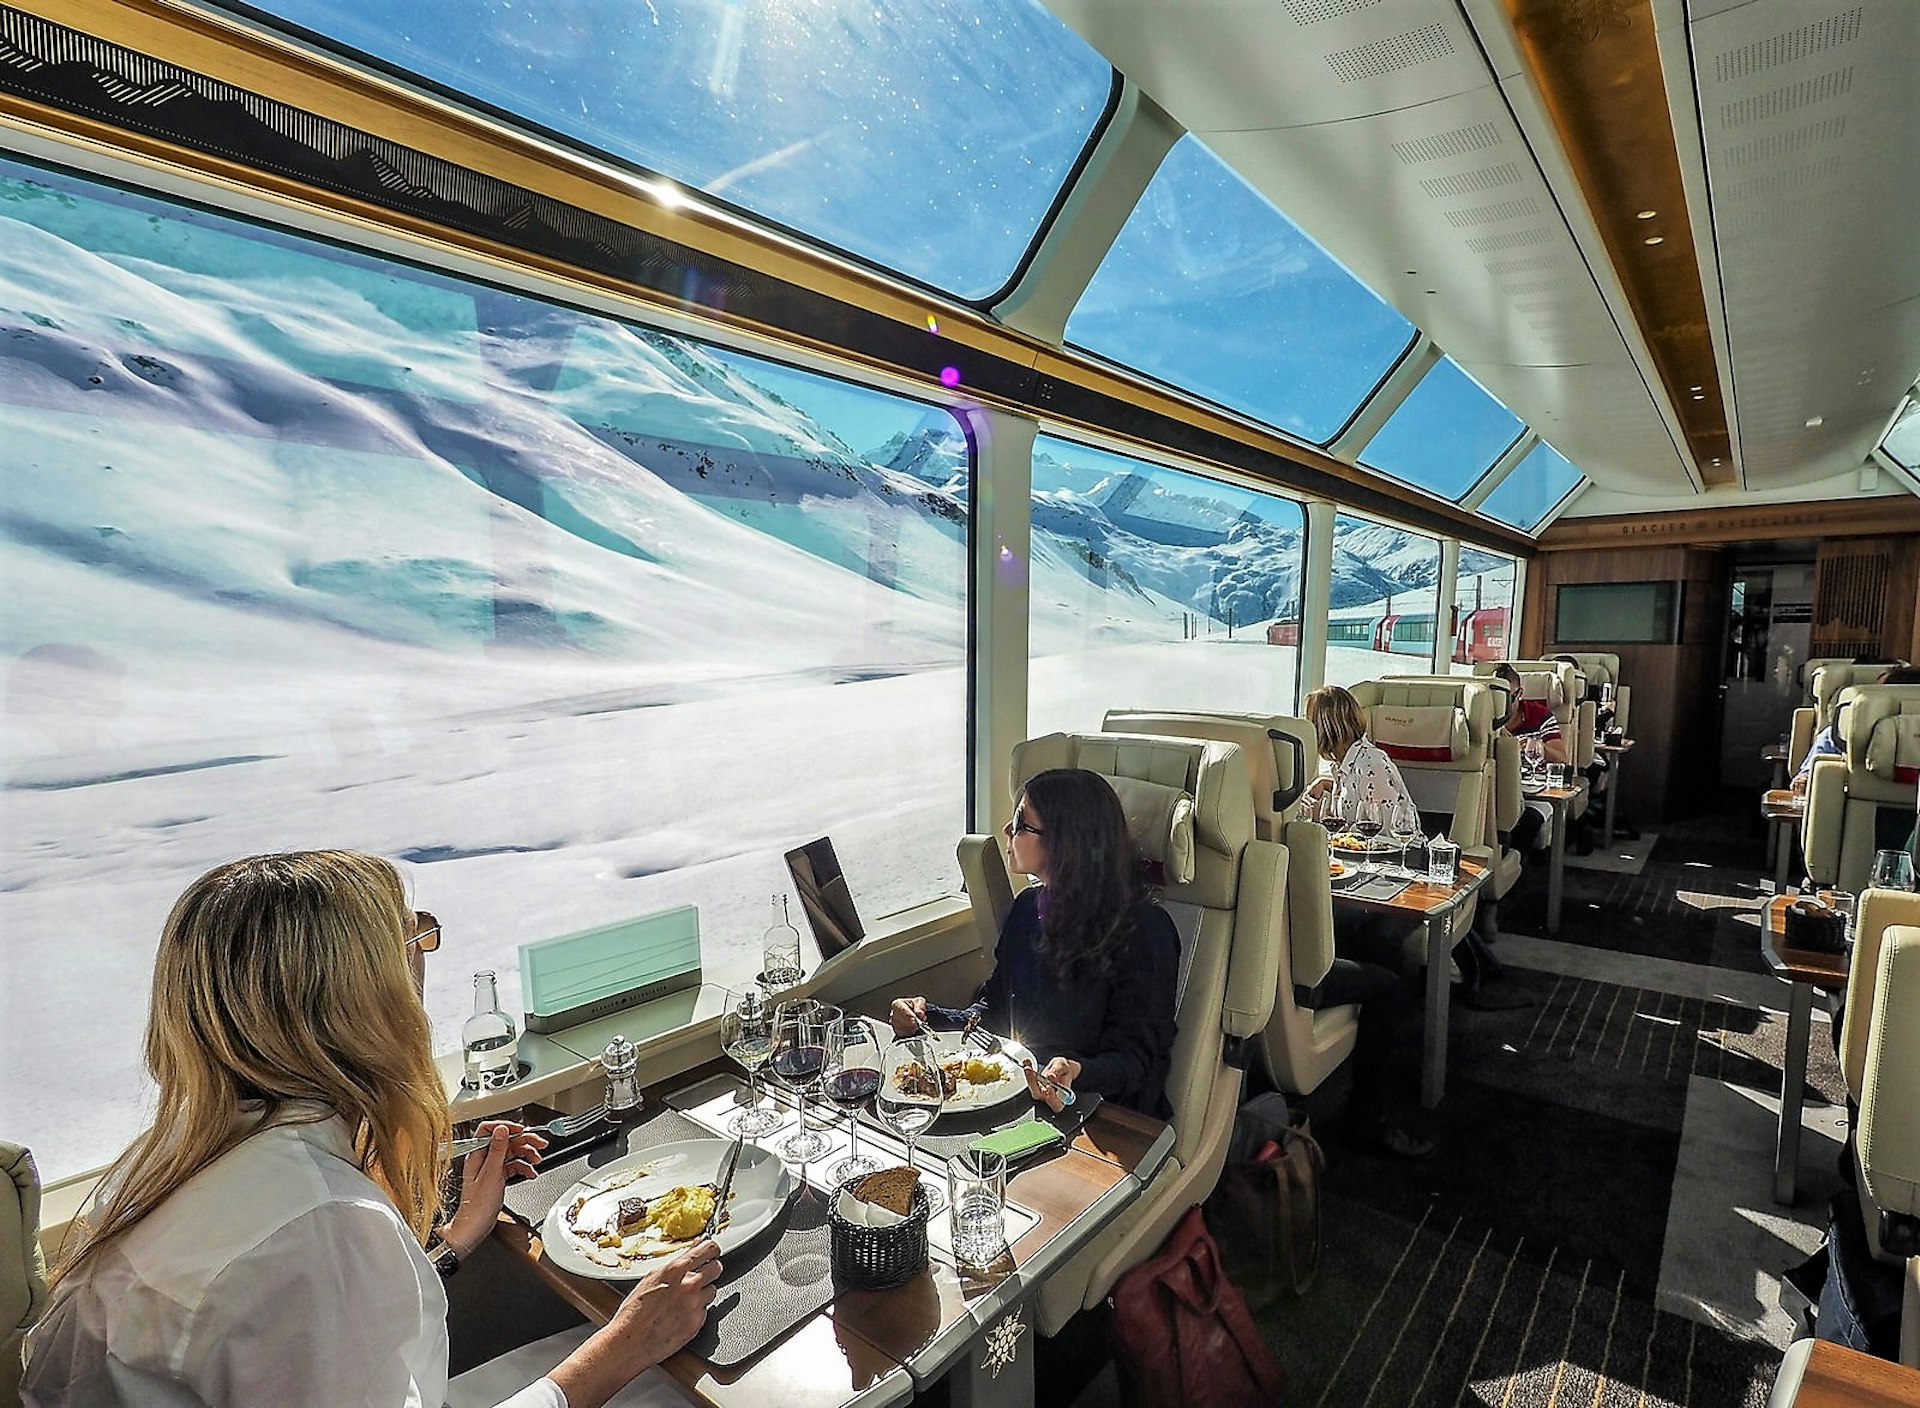 Passengers on the Glacier Express enjoy the food and views in Excellence Class